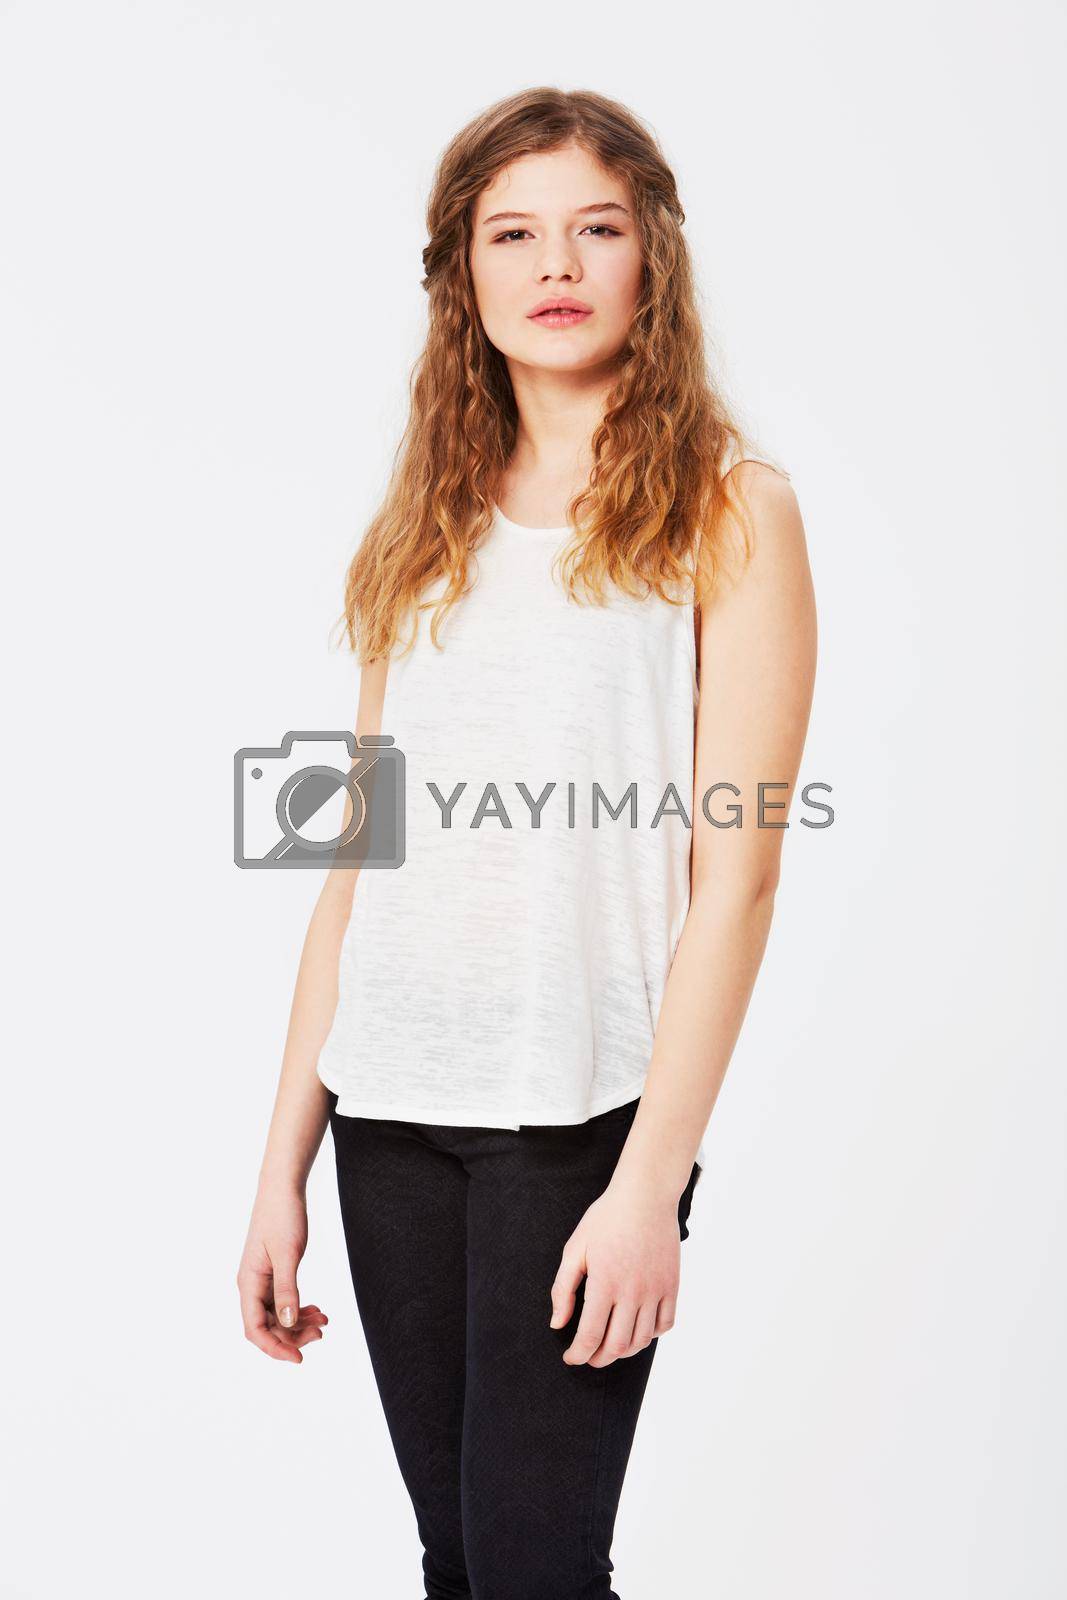 Royalty free image of Effortlessly beautiful. Isolated image of a caucasian girl in casual clothing. by YuriArcurs